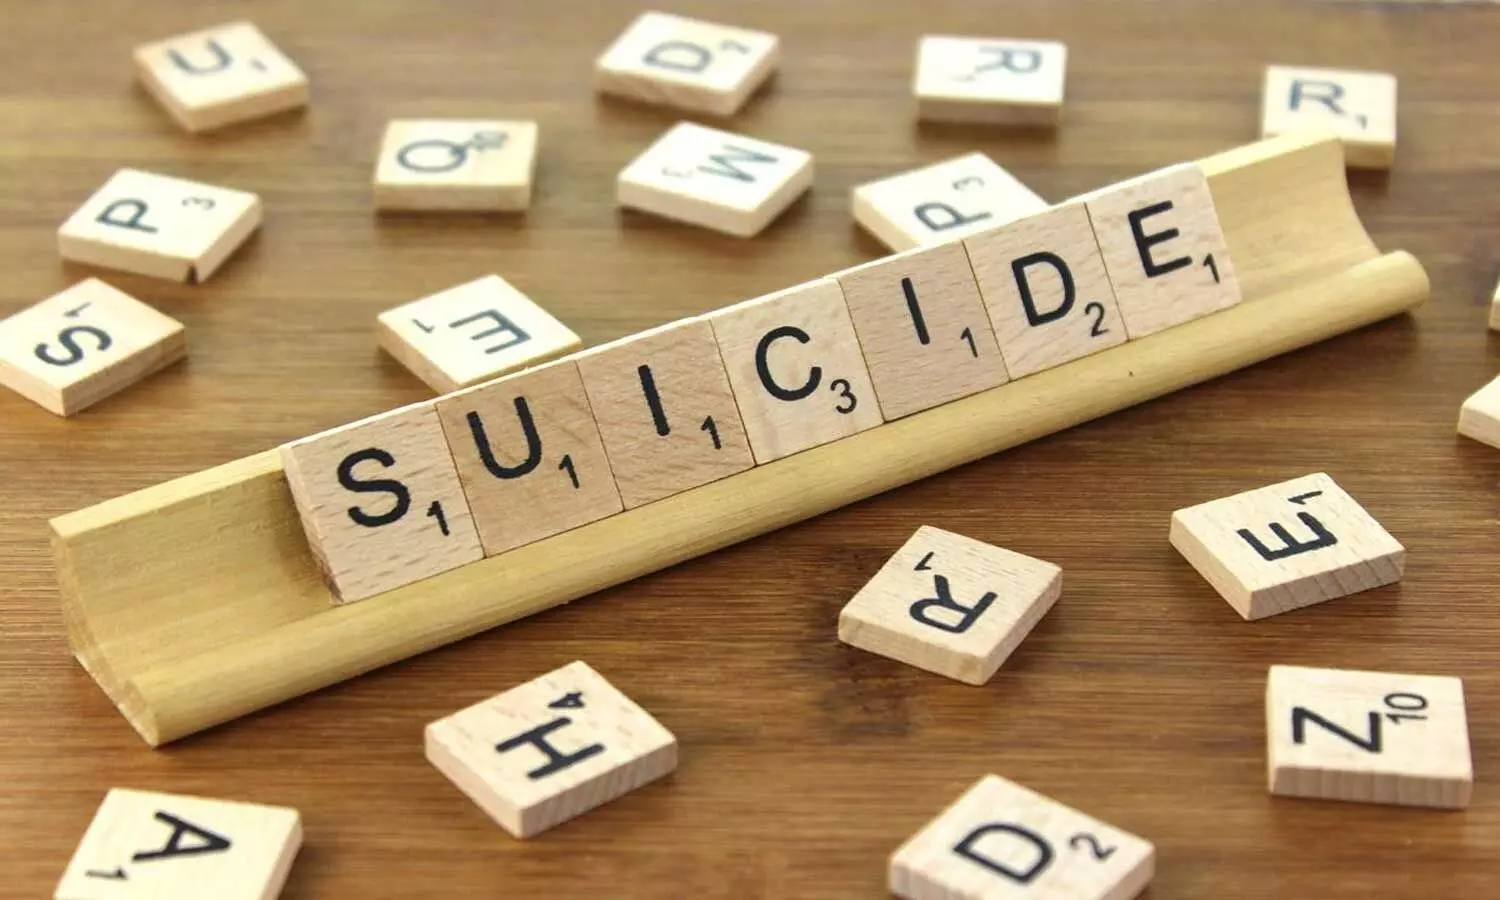 Kerala: 65-Year-Old COVID-19 Patient Commits Suicide In Kannur Government Medical College Hospital